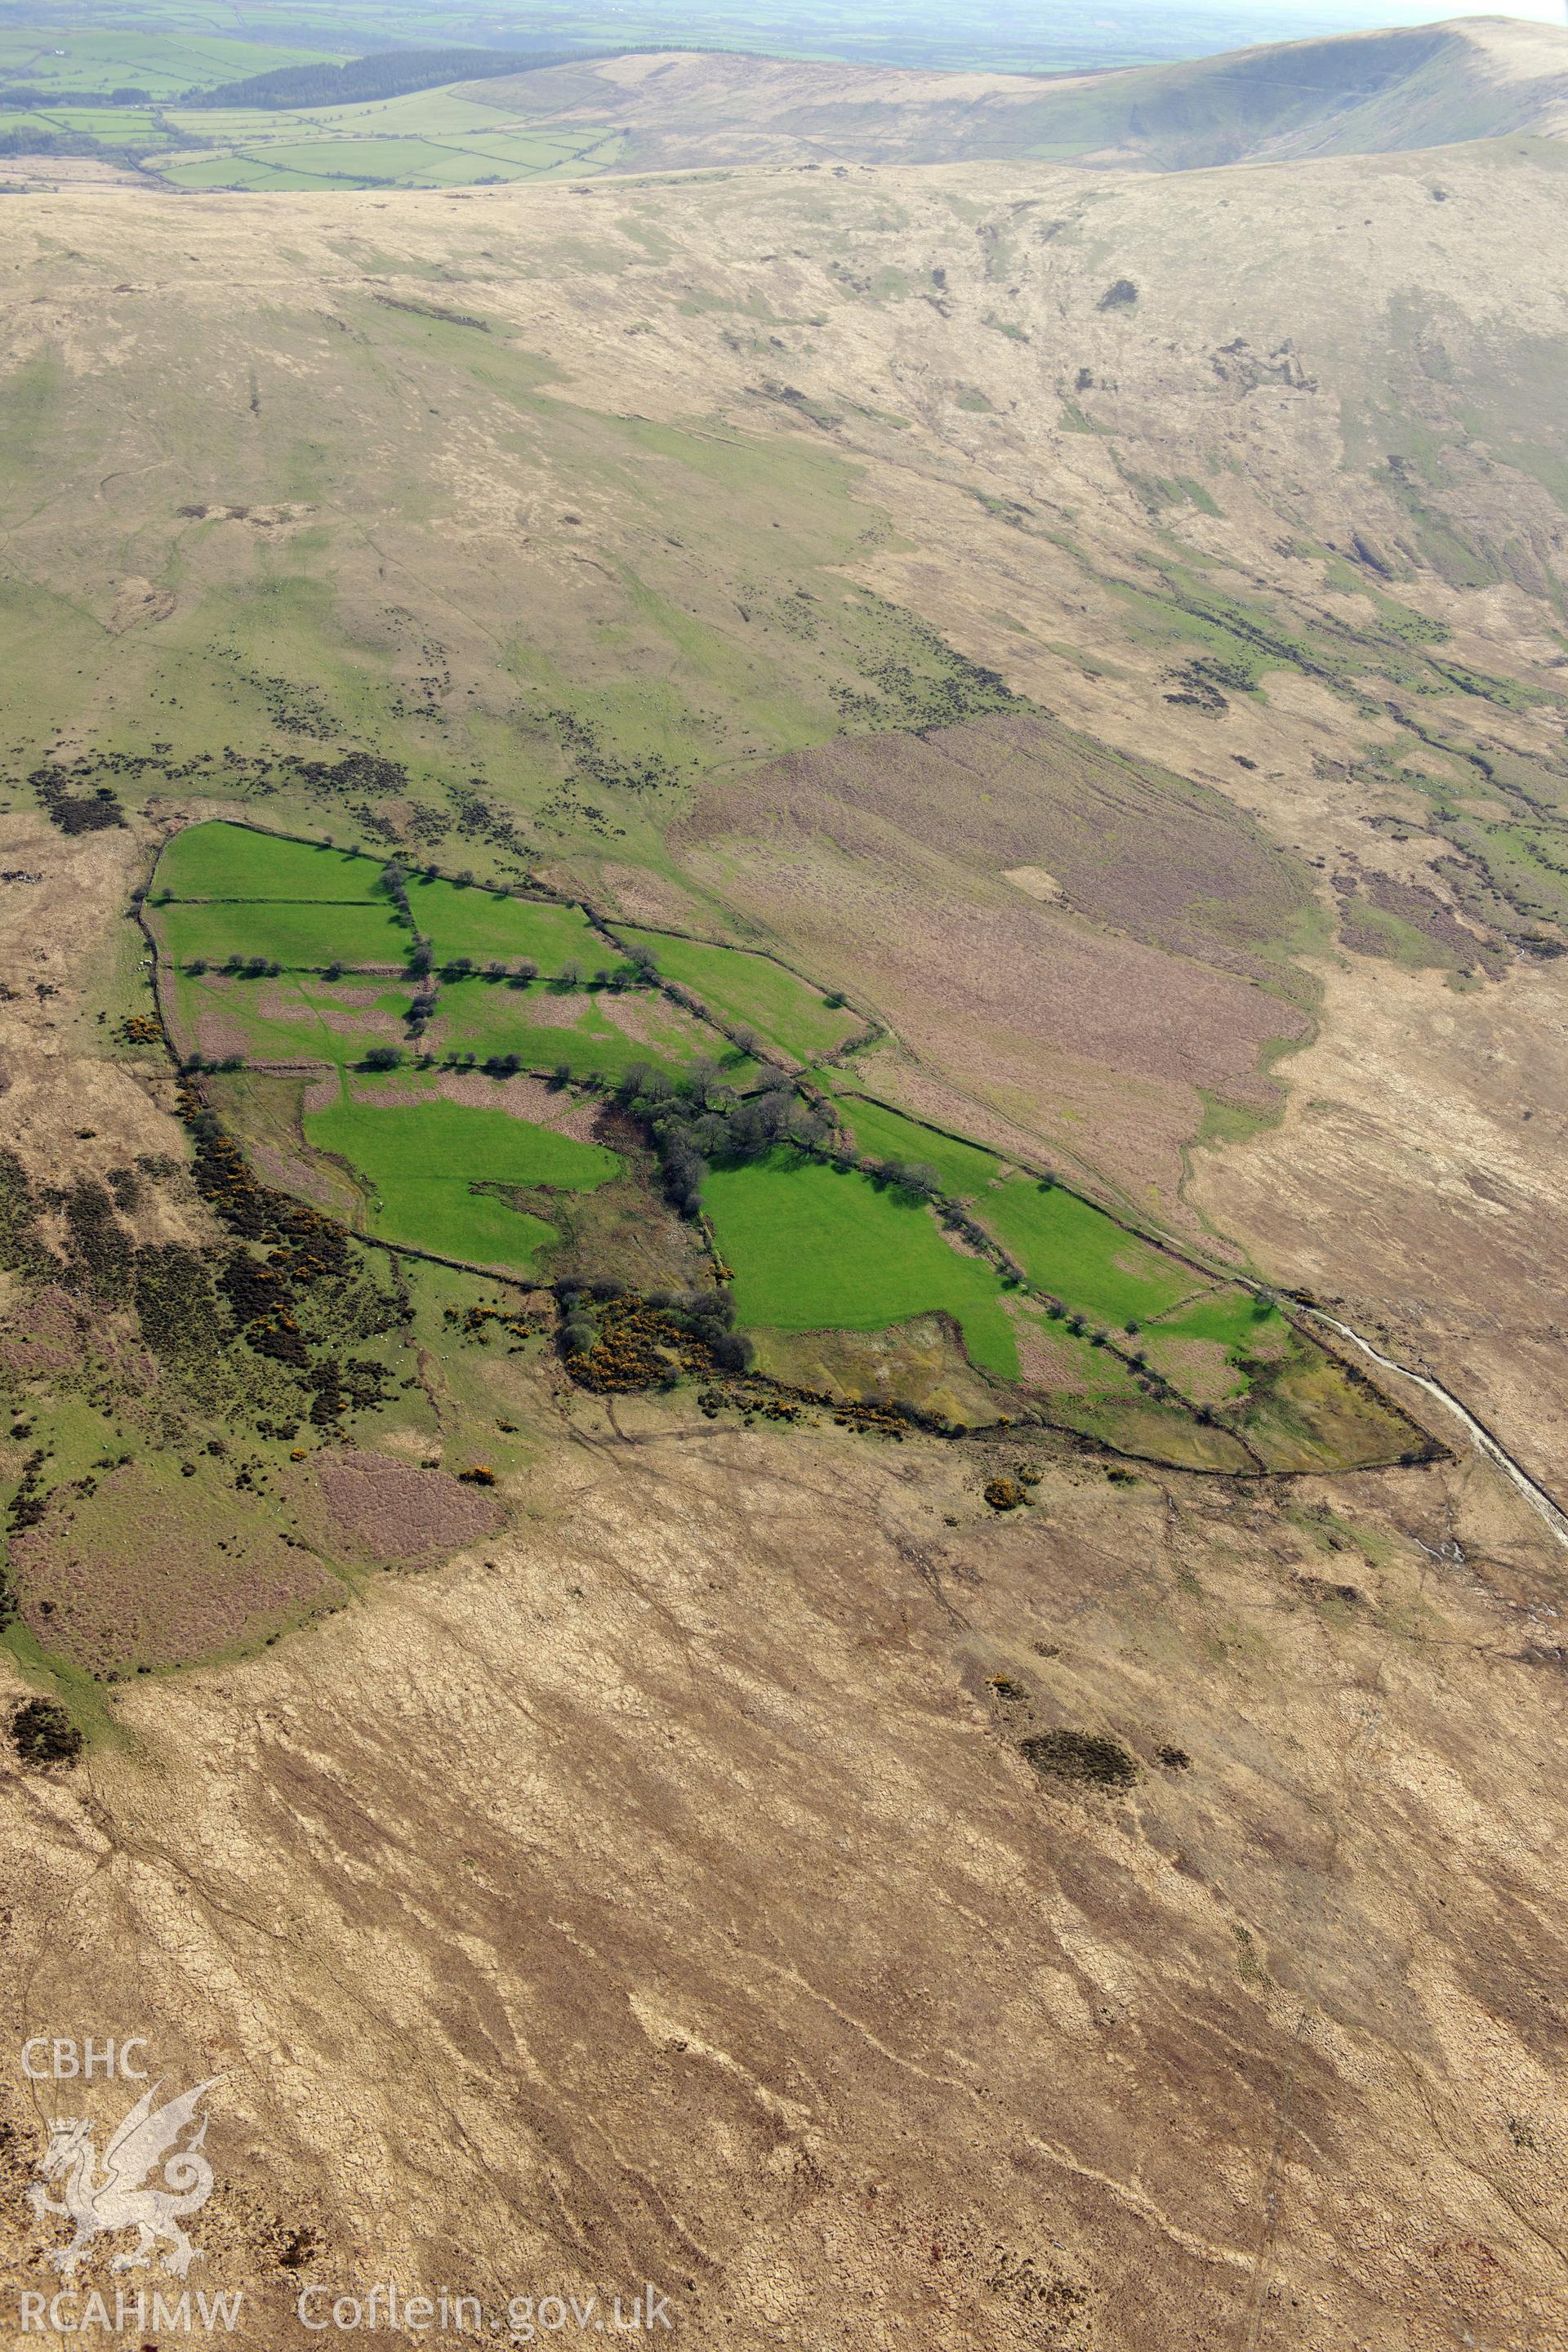 Hafod Tydfil Farmstead, South of Brynberian. Oblique aerial photograph taken during the Royal Commission's programme of archaeological aerial reconnaissance by Toby Driver on 15th April 2015.